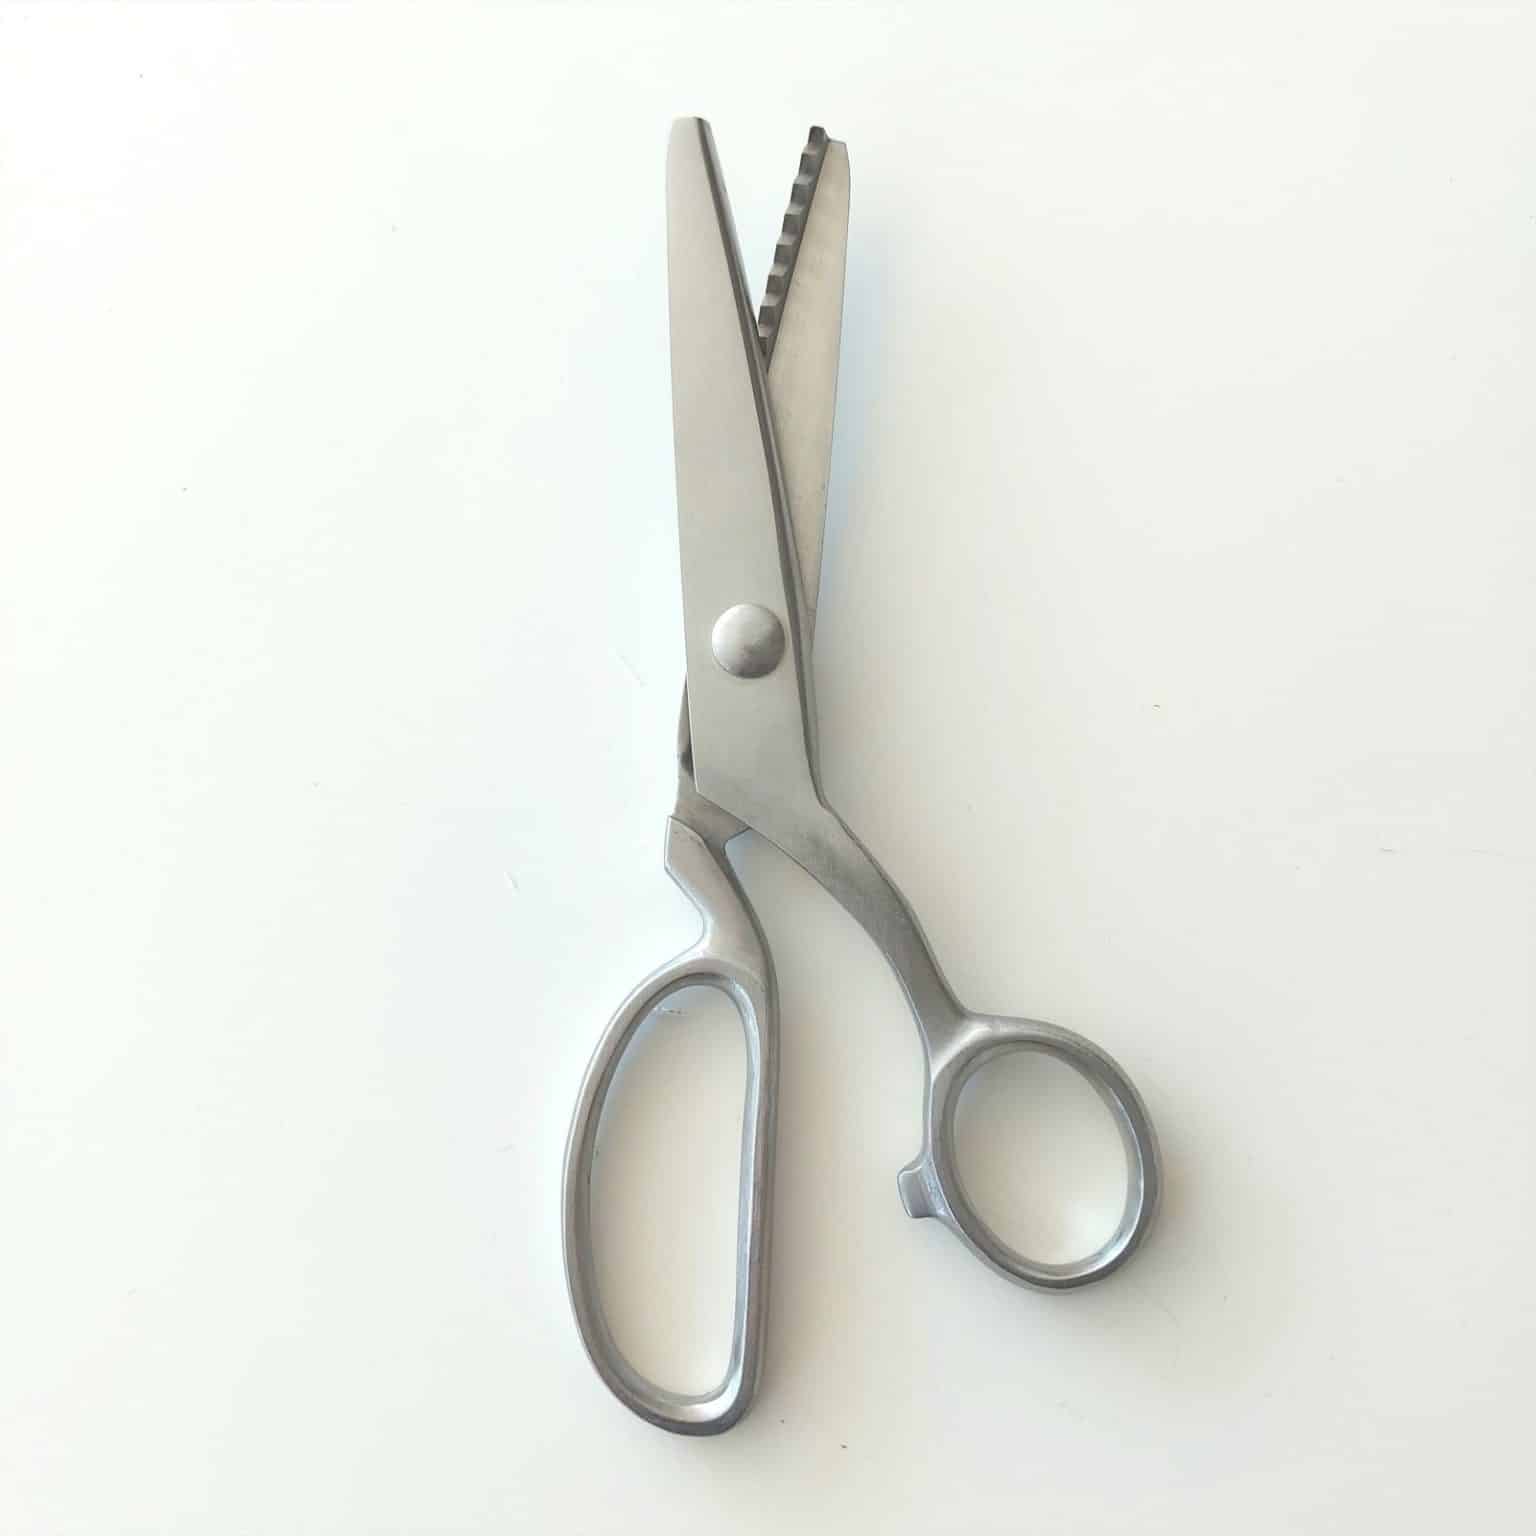 Steel pinking shears | More Sewing